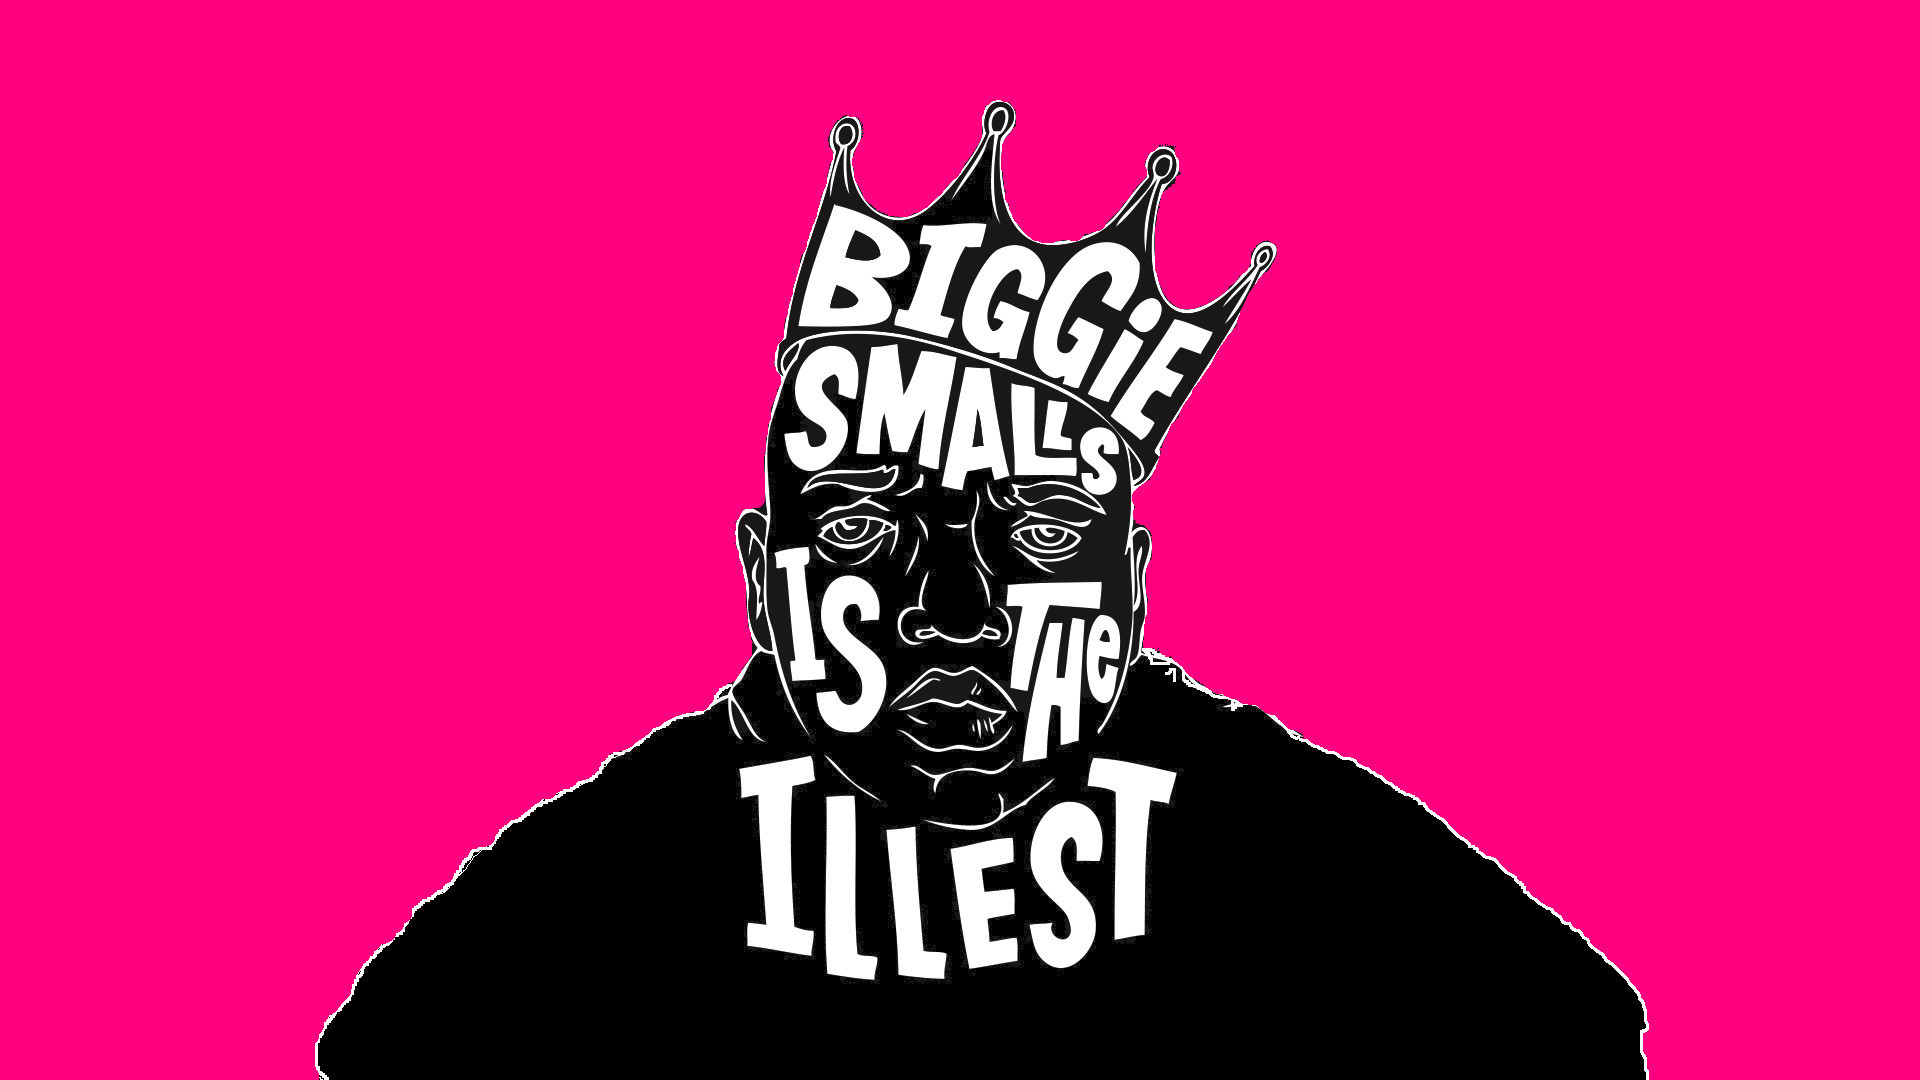 1920x1080  Biggie Smalls is the Illest Wallpaper for Phones and Tablets